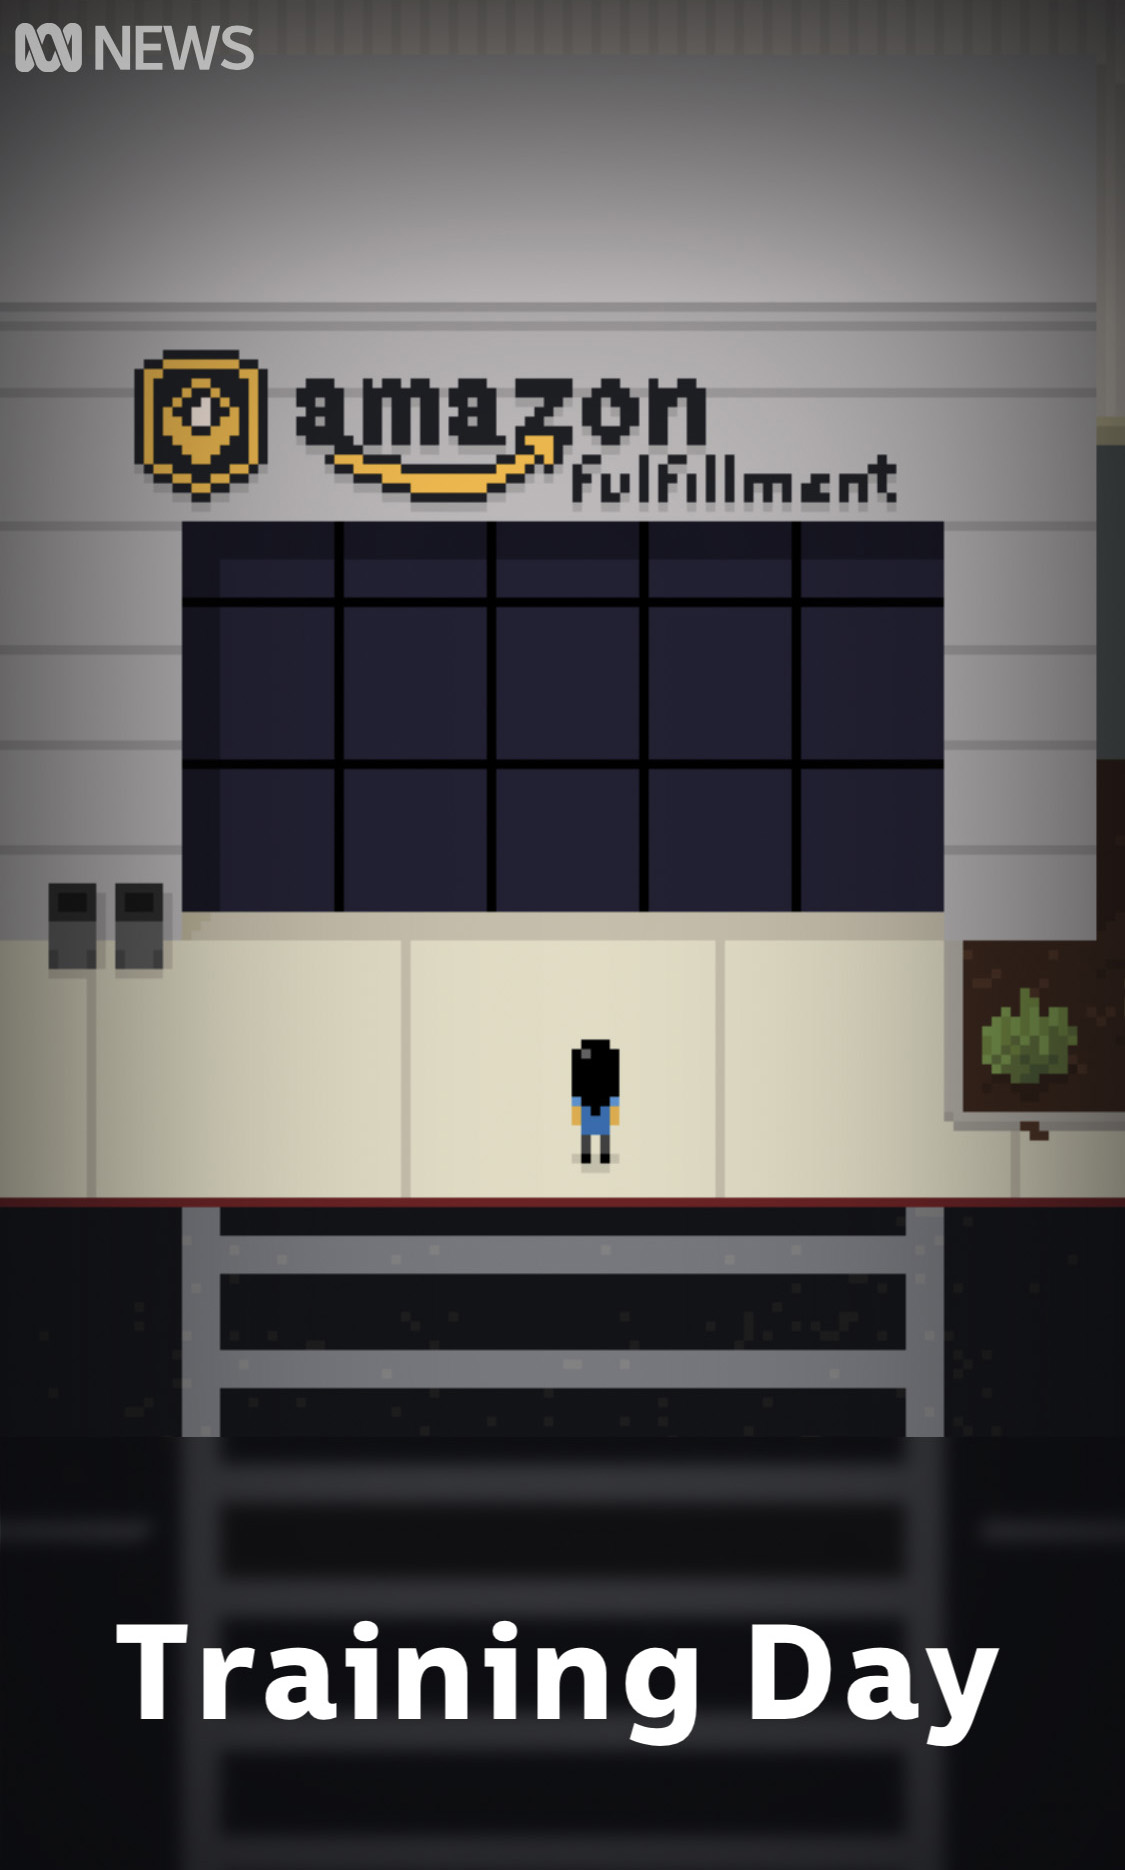 Experience what it is like to work in an Amazon warehouse 